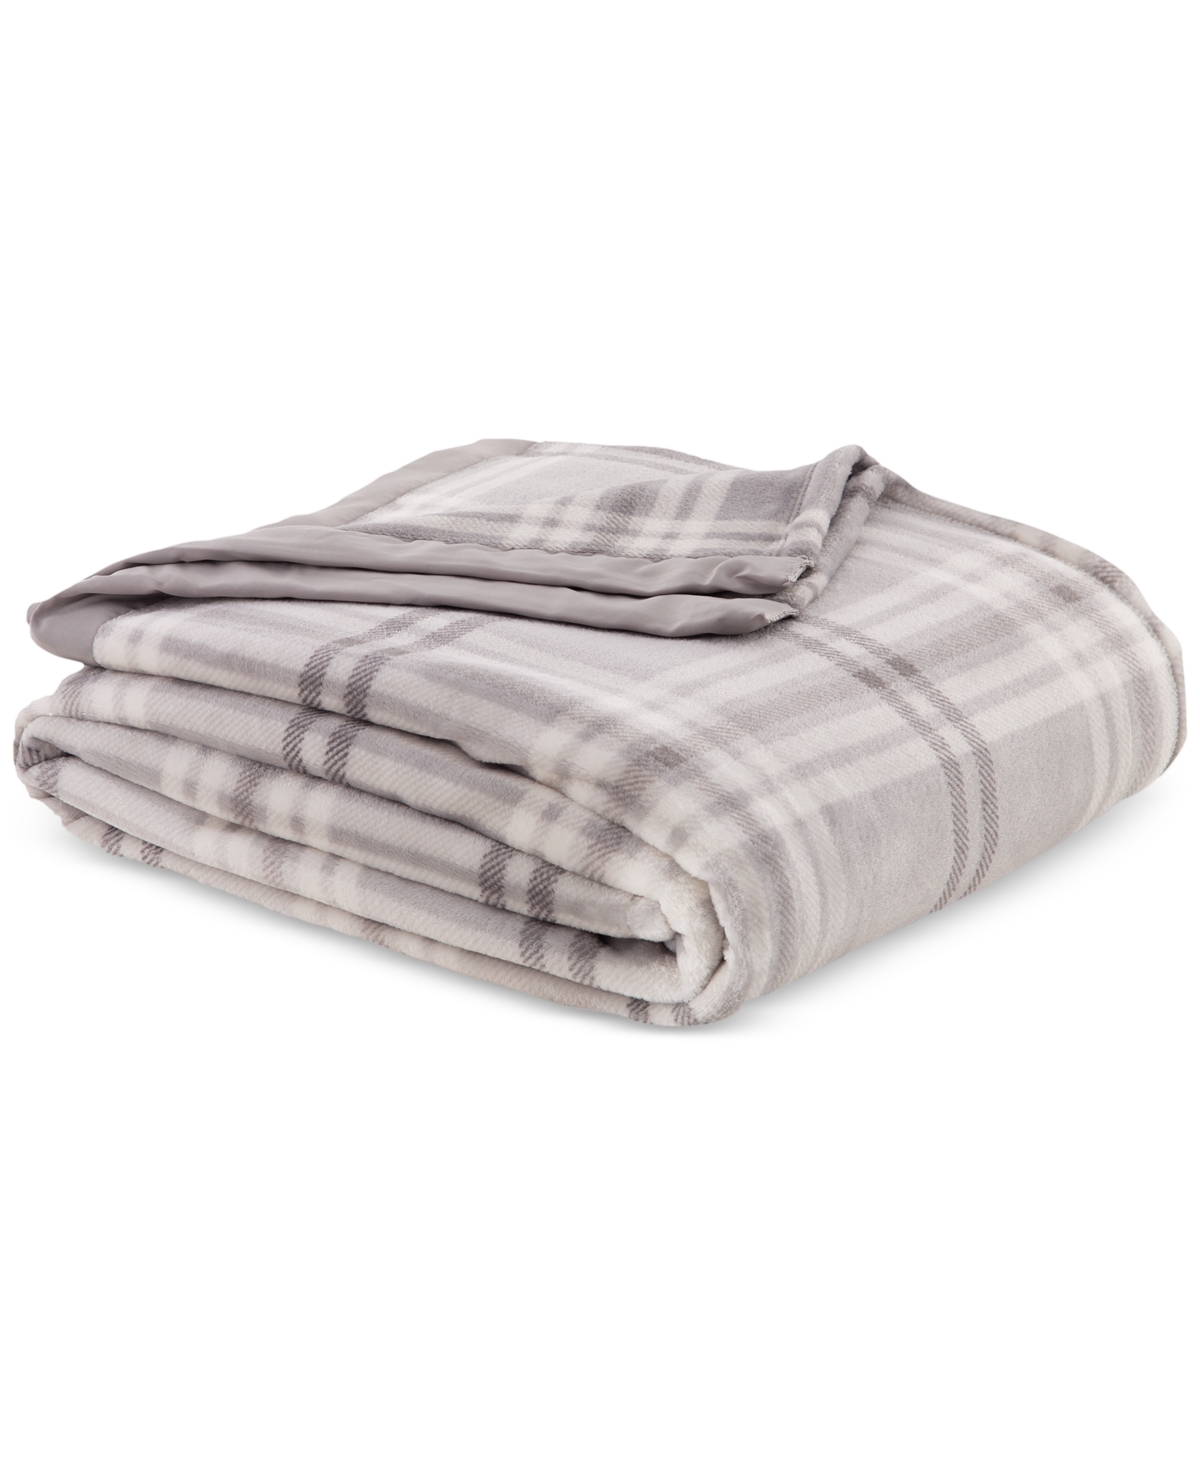 Berkshire Classic Velvety Plush Blanket, Twin, Created For Macy's In Grey Plaid